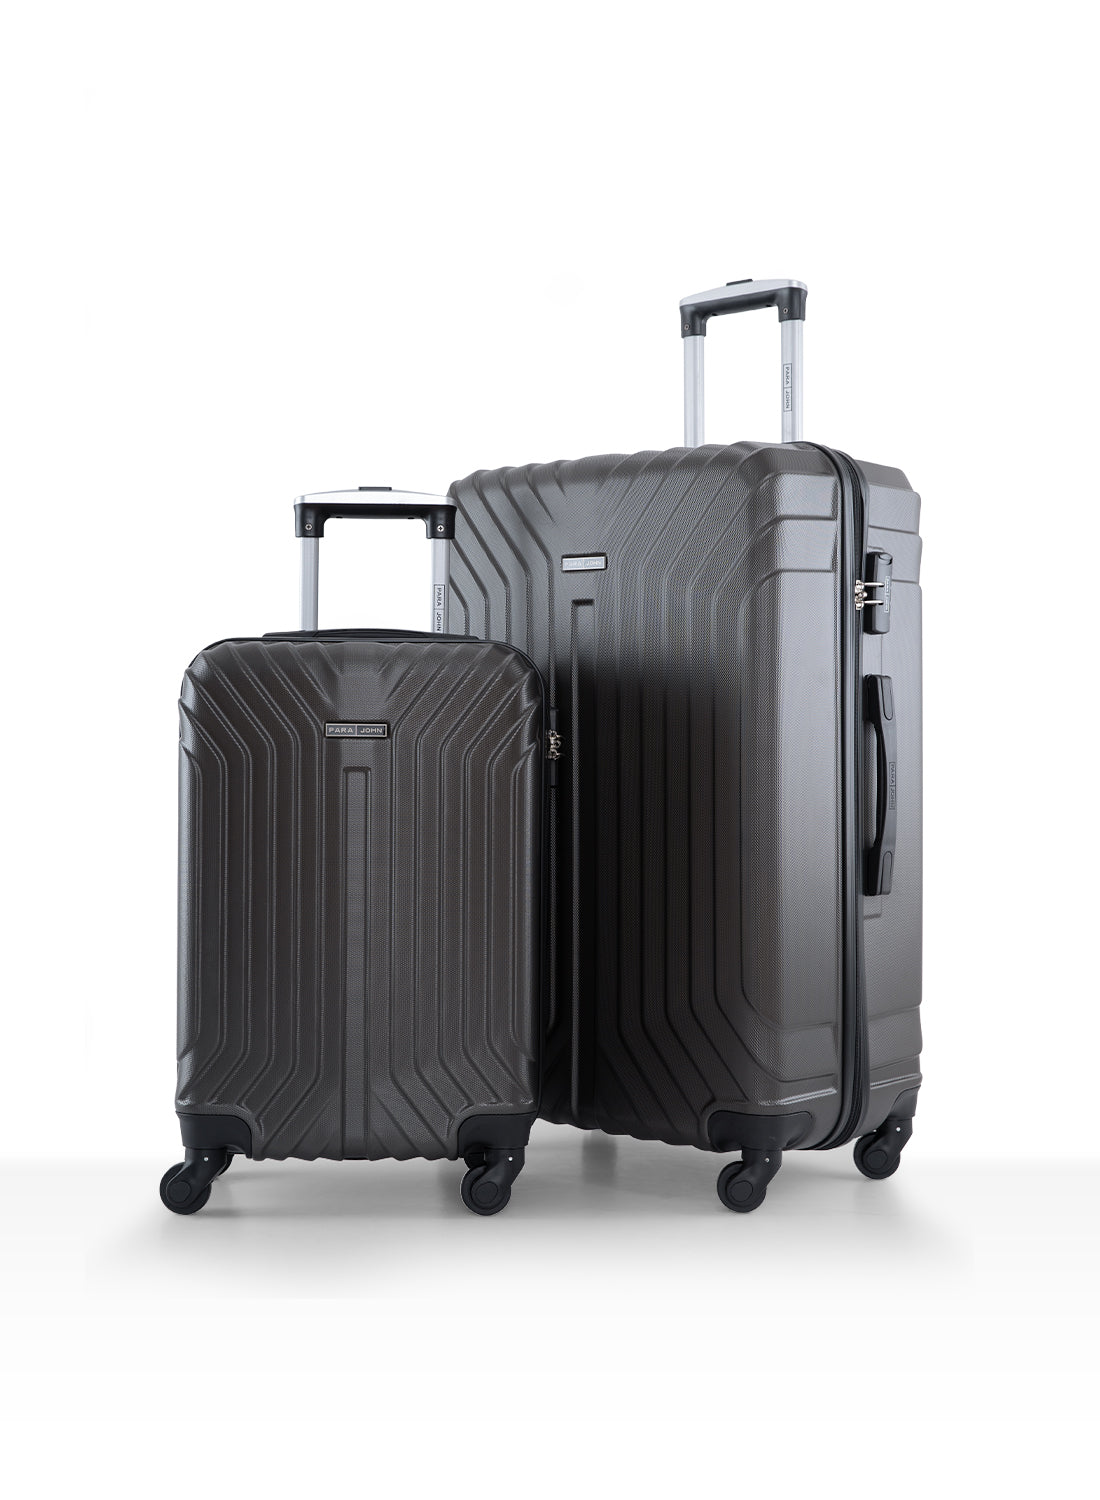 Winso 2-Piece ABS Hardside Spinner Luggage Trolley Set